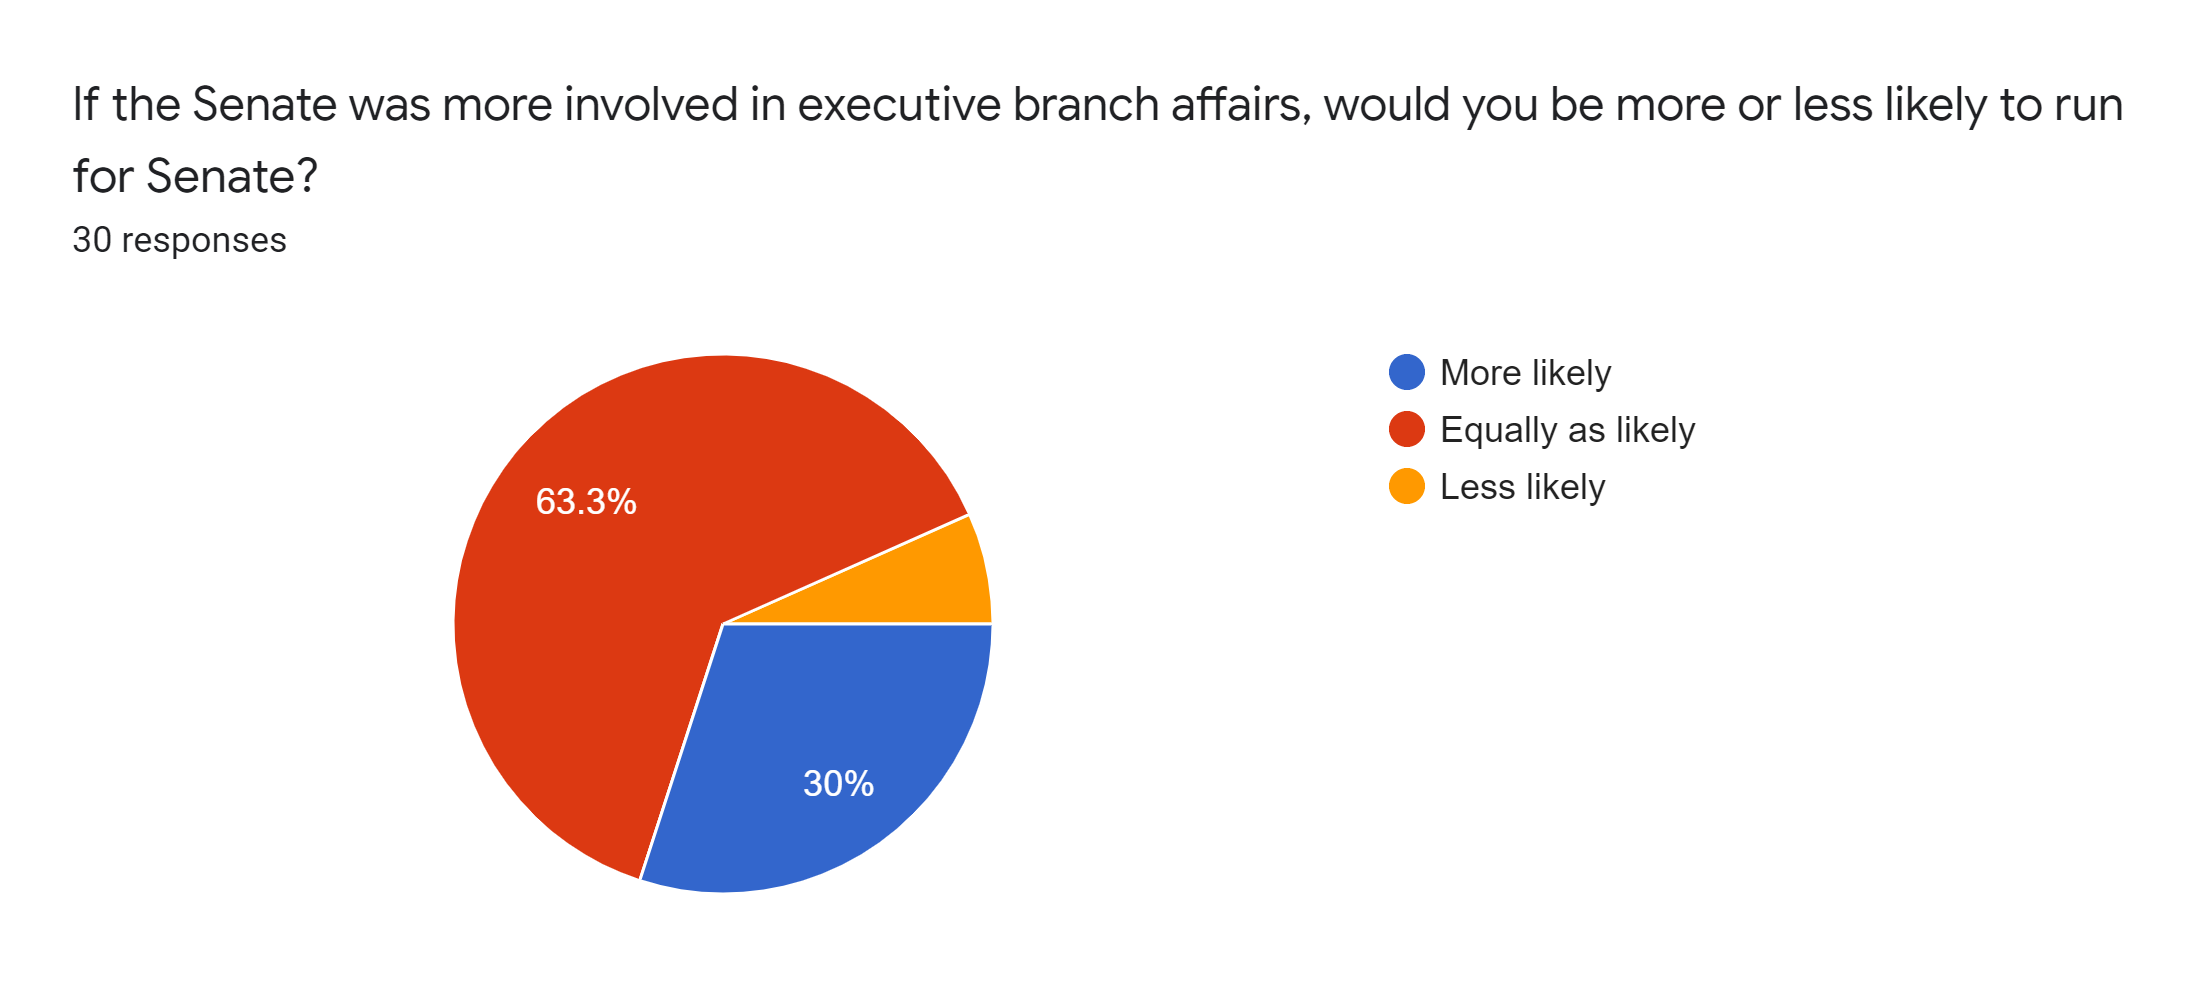 Forms response chart. Question title: If the Senate was more involved in executive branch affairs, would you be more or less likely to run for Senate?. Number of responses: 30 responses.